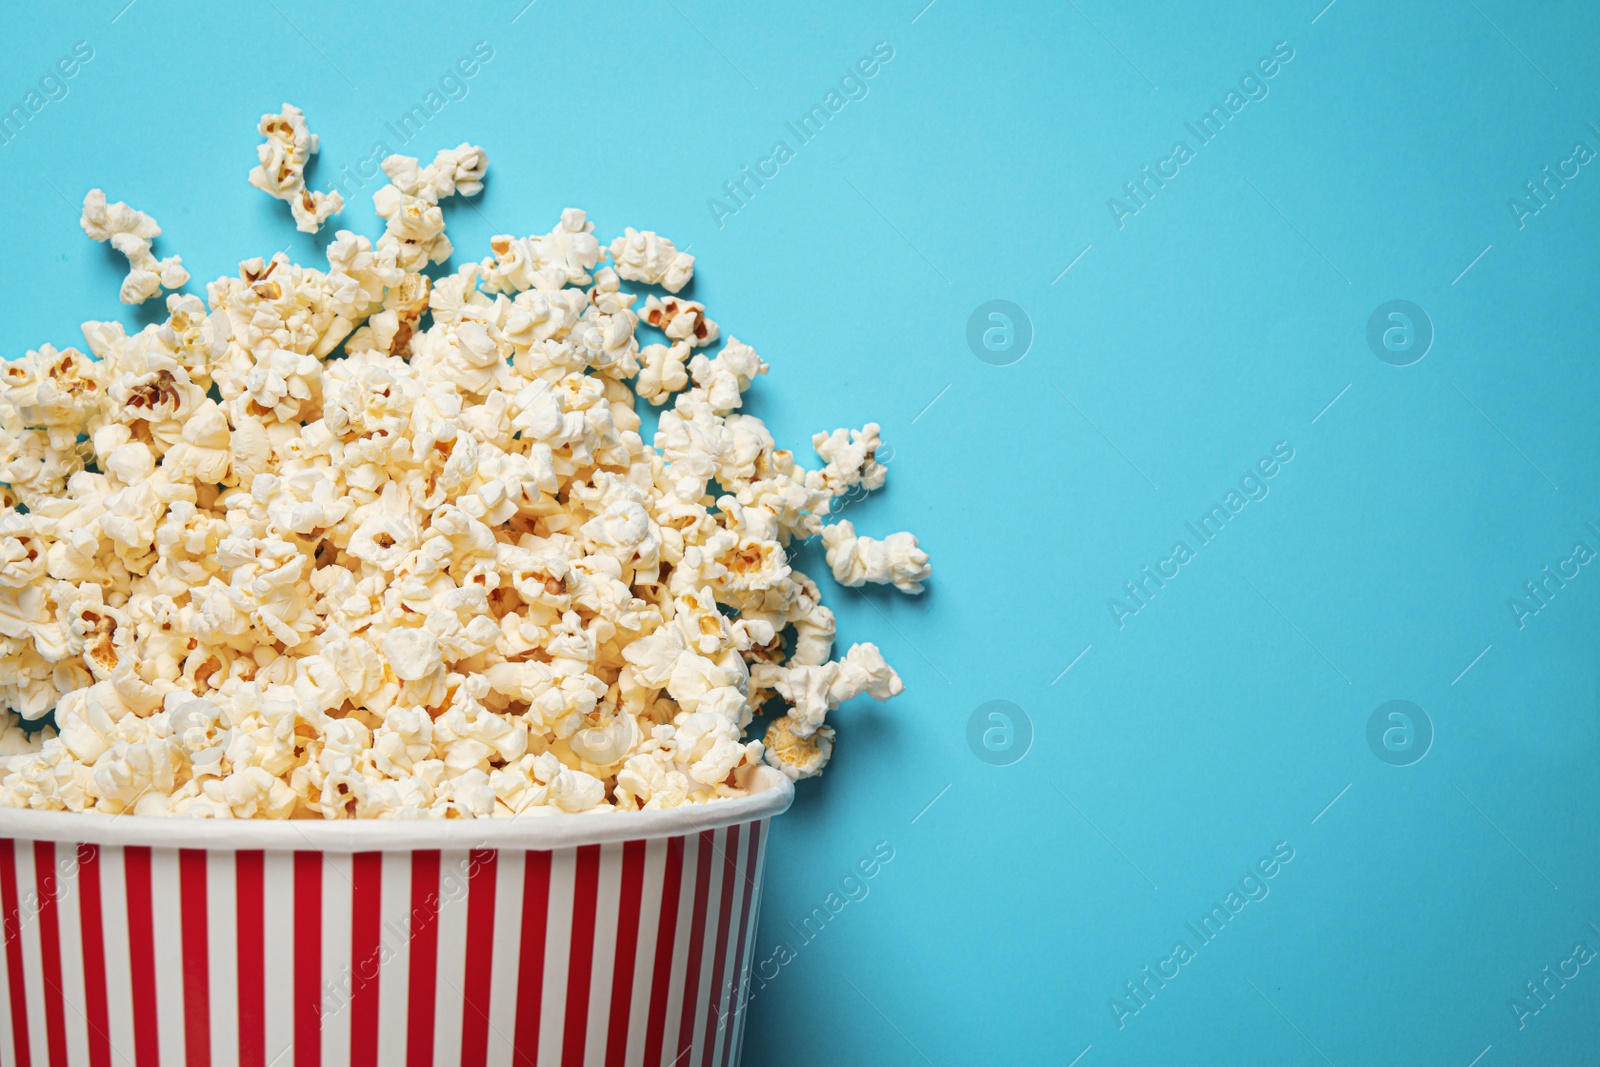 Photo of Overturned paper bucket with delicious popcorn on light blue background, top view. Space for text